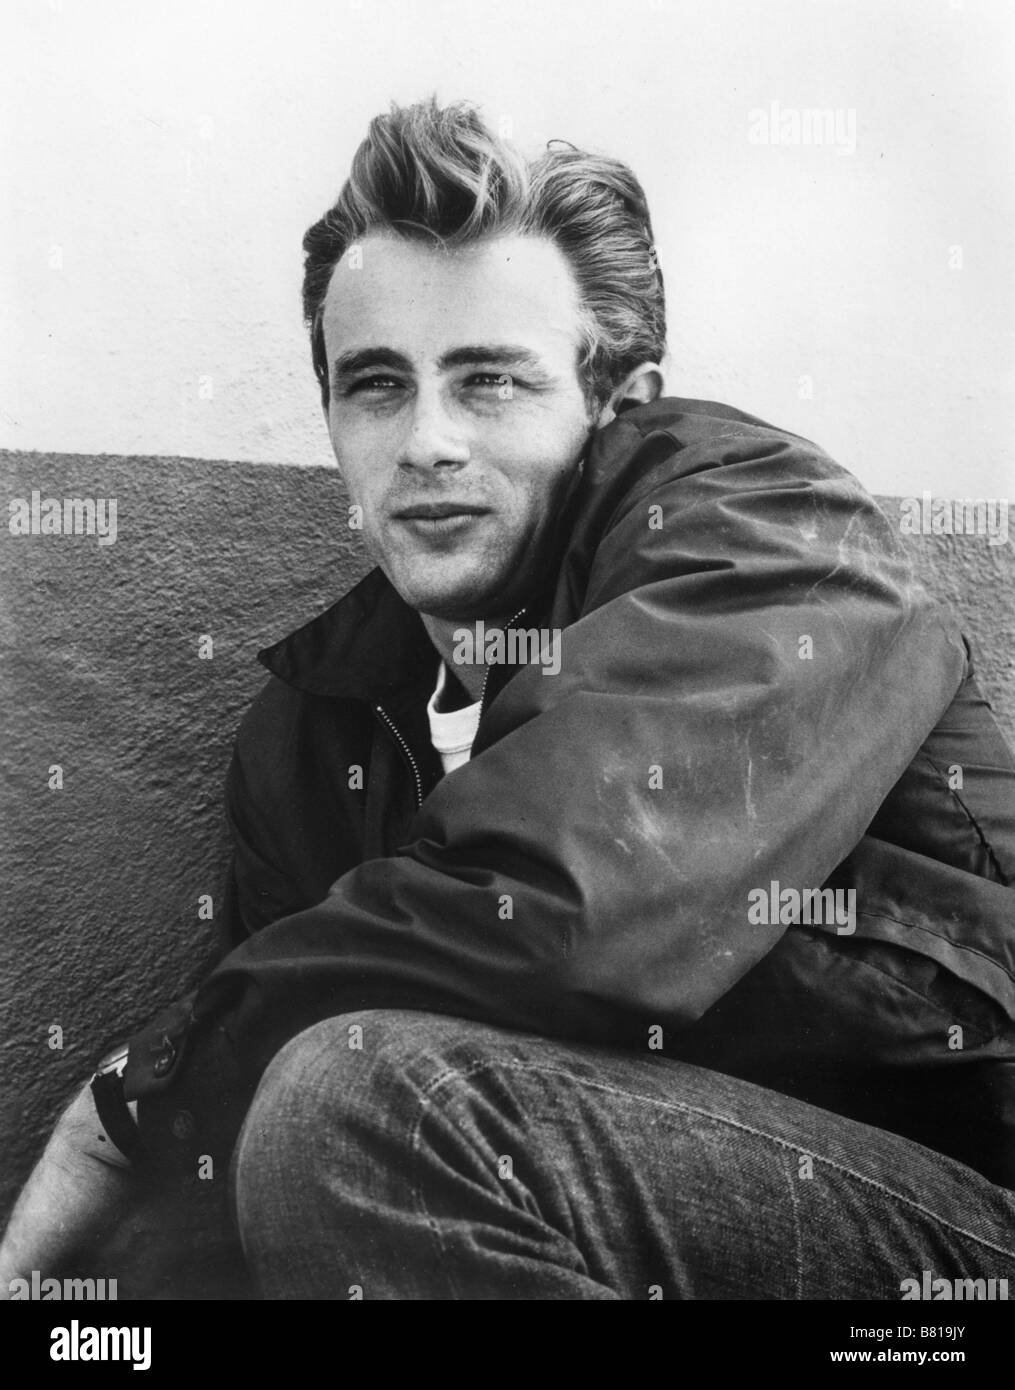 James Dean Date of birth February 1931 Marion, Indiana, USA Date of death  30 September 1955 Cholame, California, USA Stock Photo Alamy